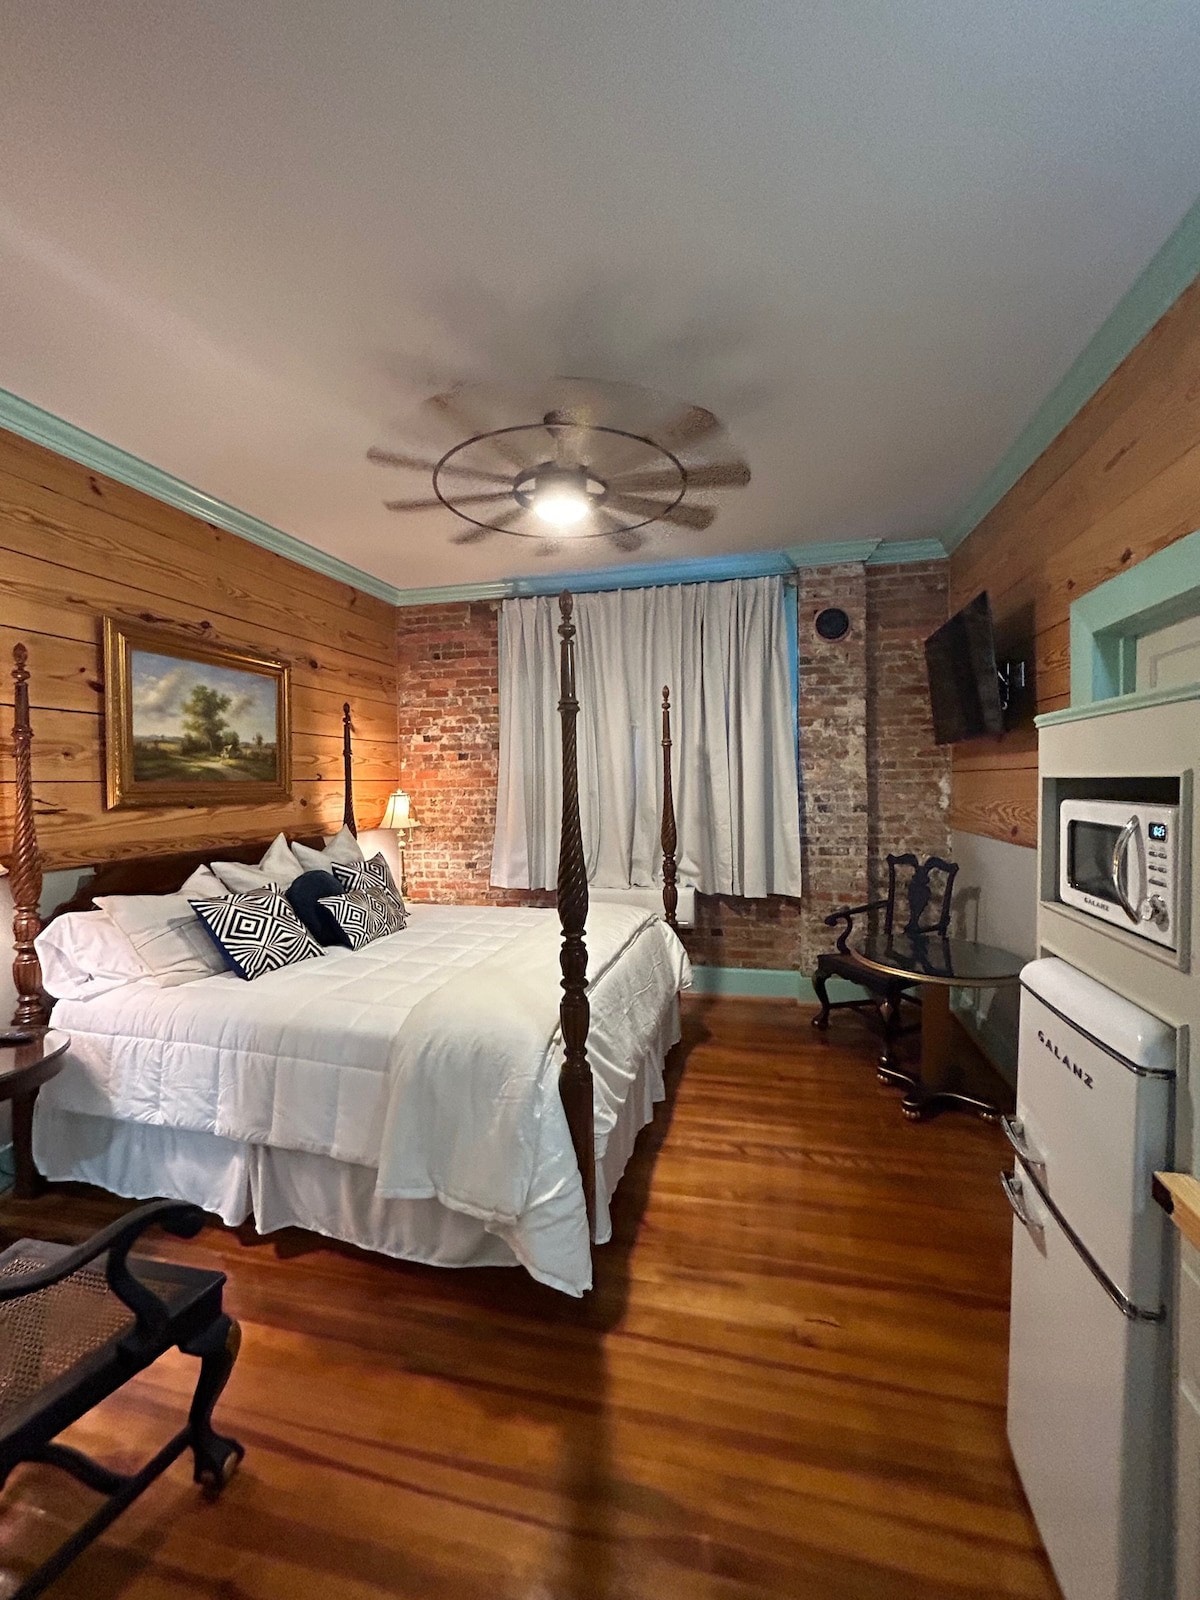 Room 4 (sleeps 2) at Chipley's Squareview Inn